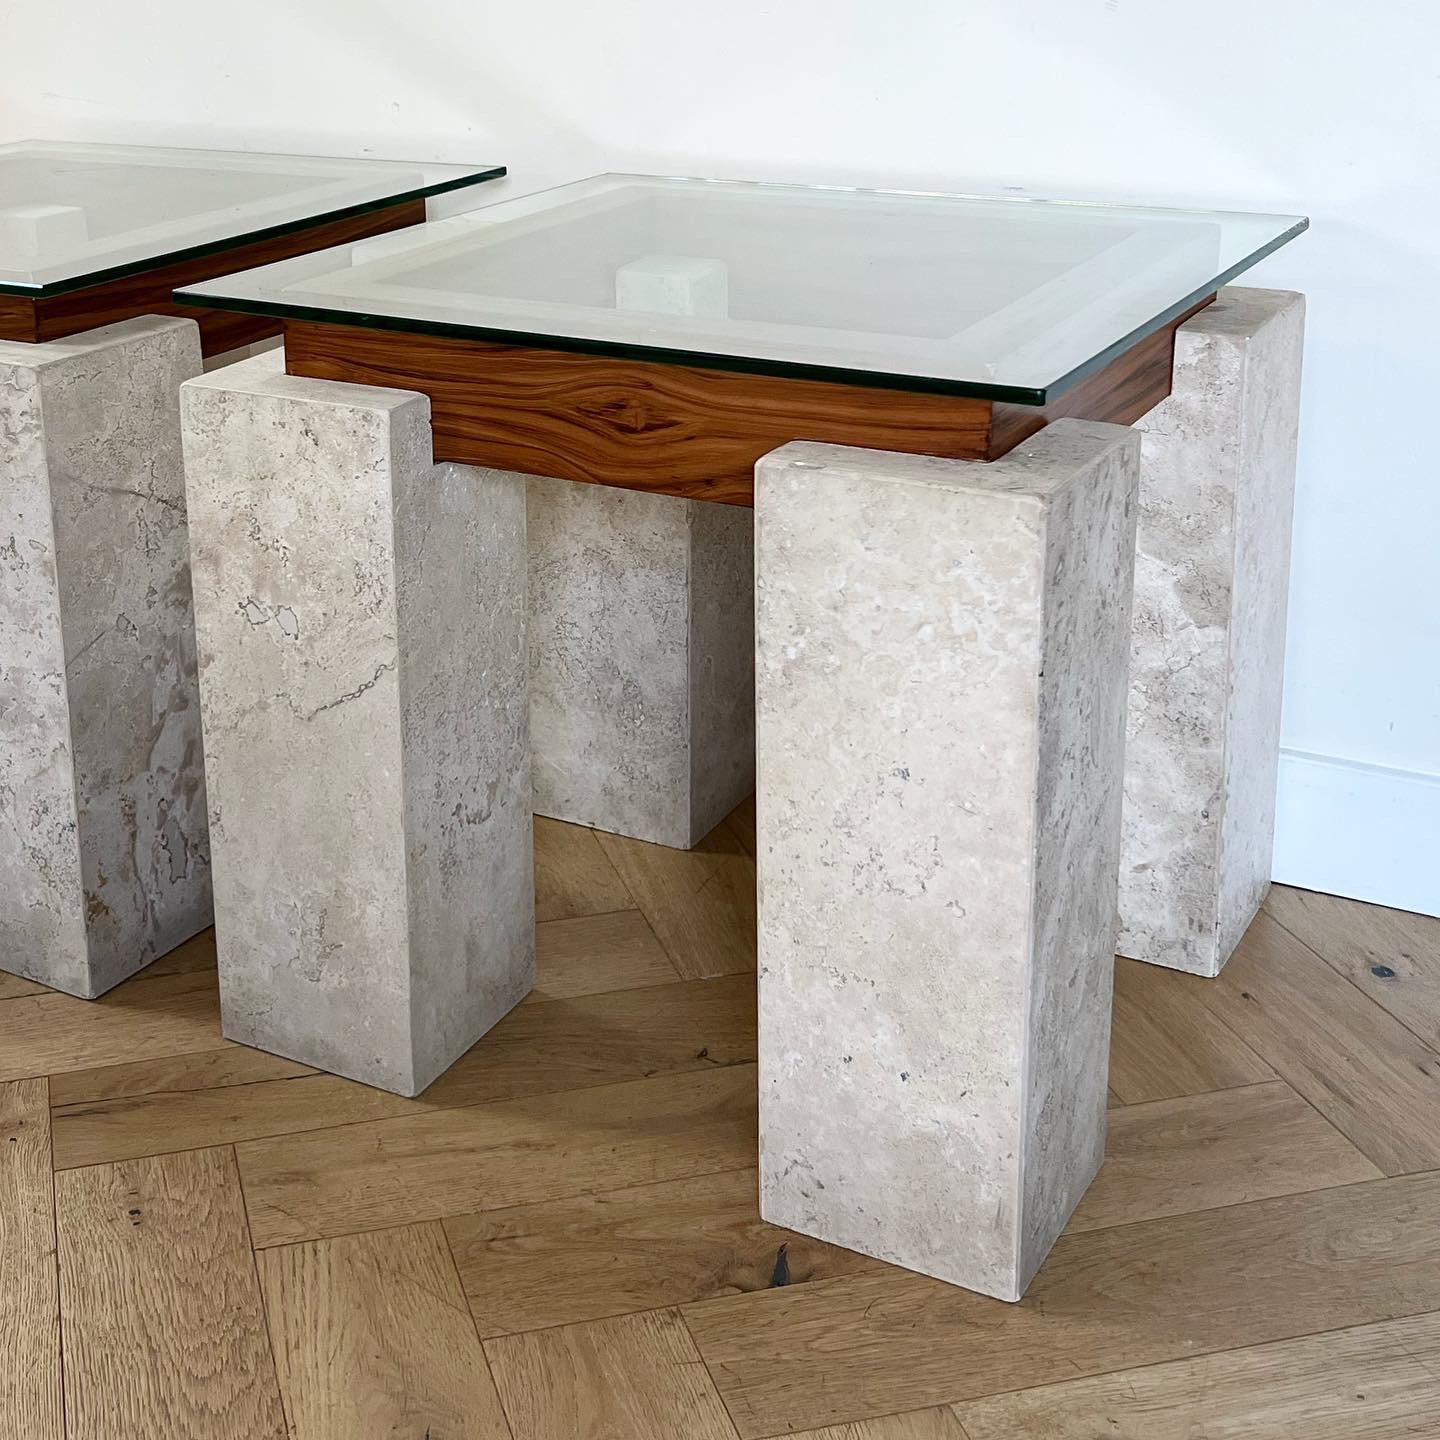 Post-Modern Pair of Marble, Wood, and Glass Tables, circa Late 1970s